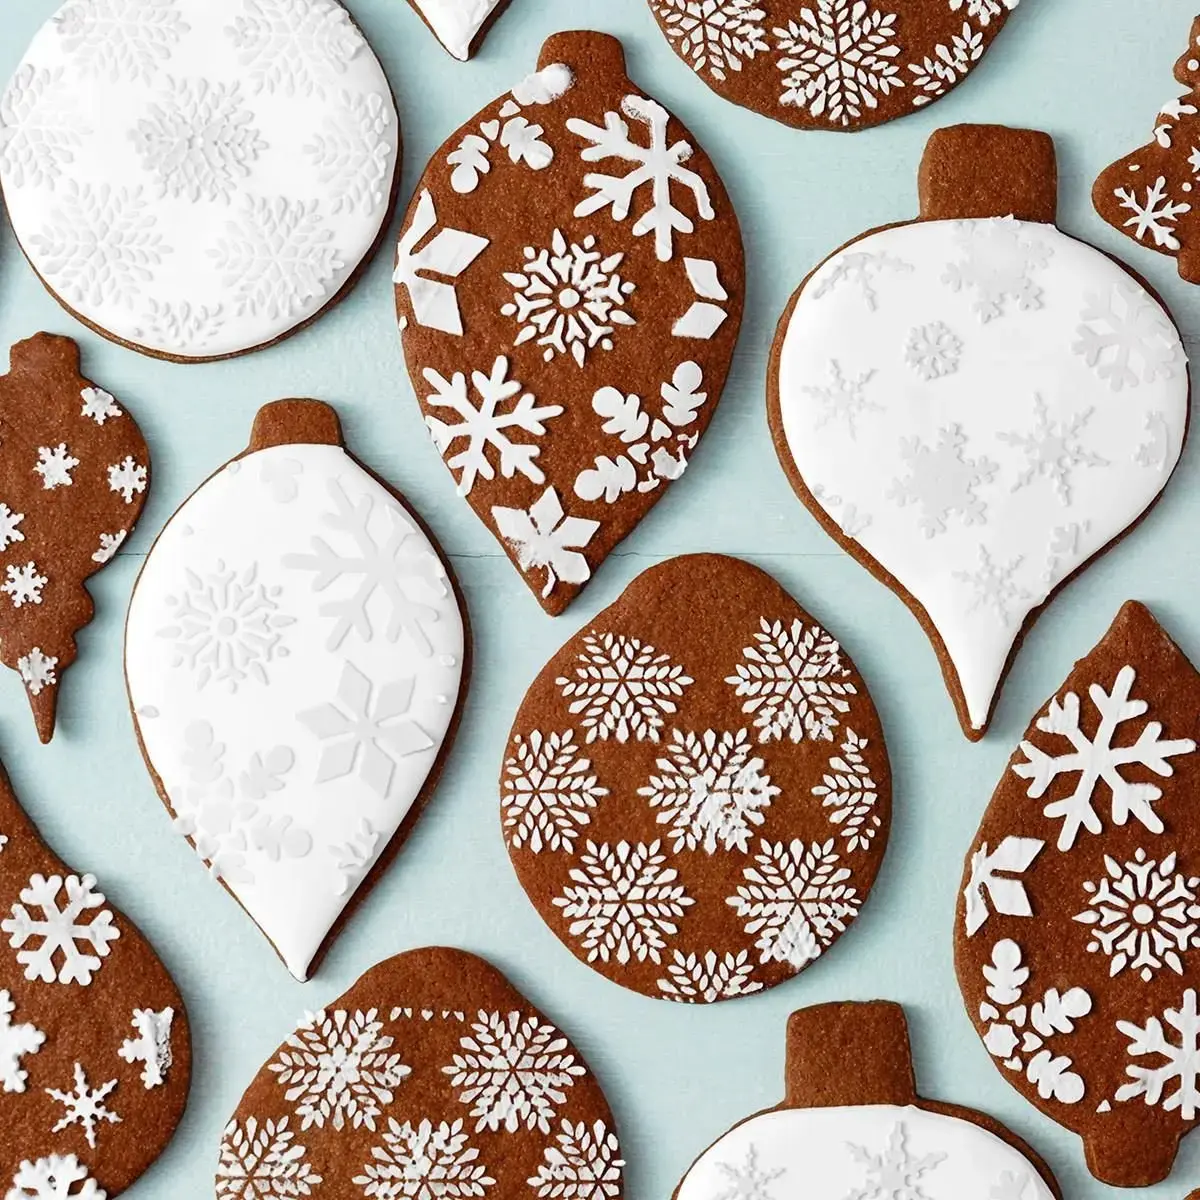 Festive and Delicious Holiday Recipes from Flipboard's Tastemakers